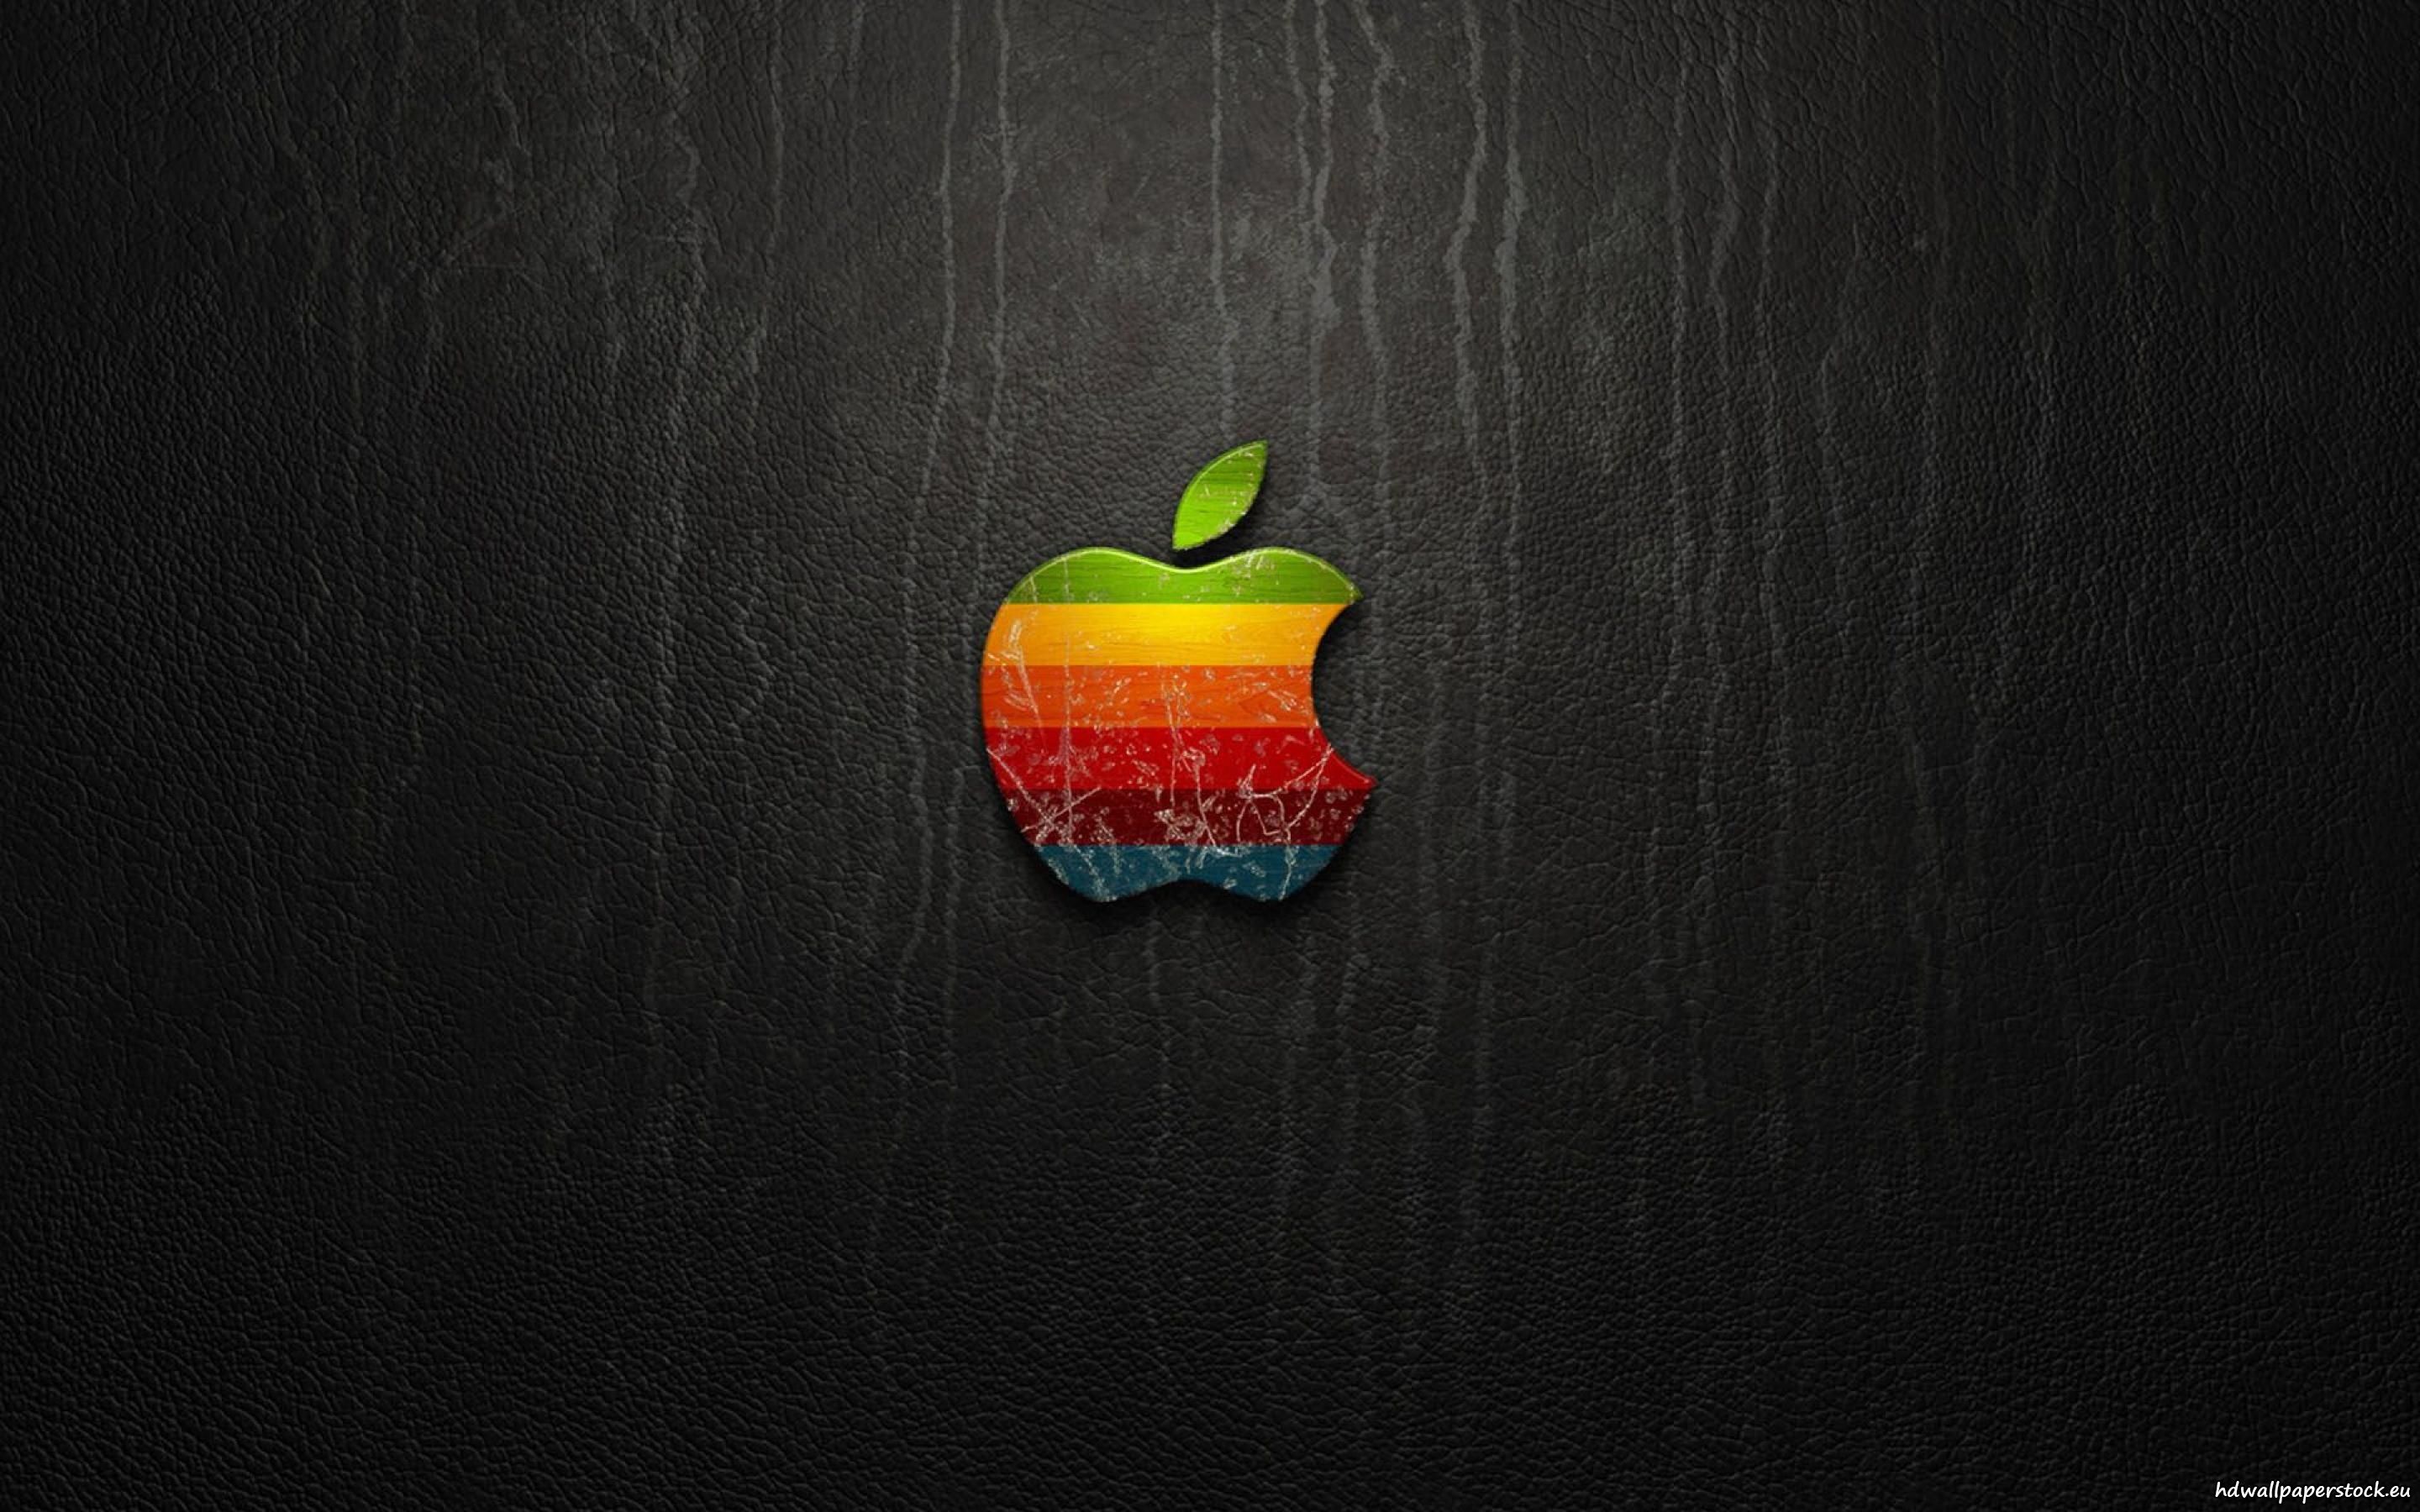 2880 1800 Os Apple Wallpapers